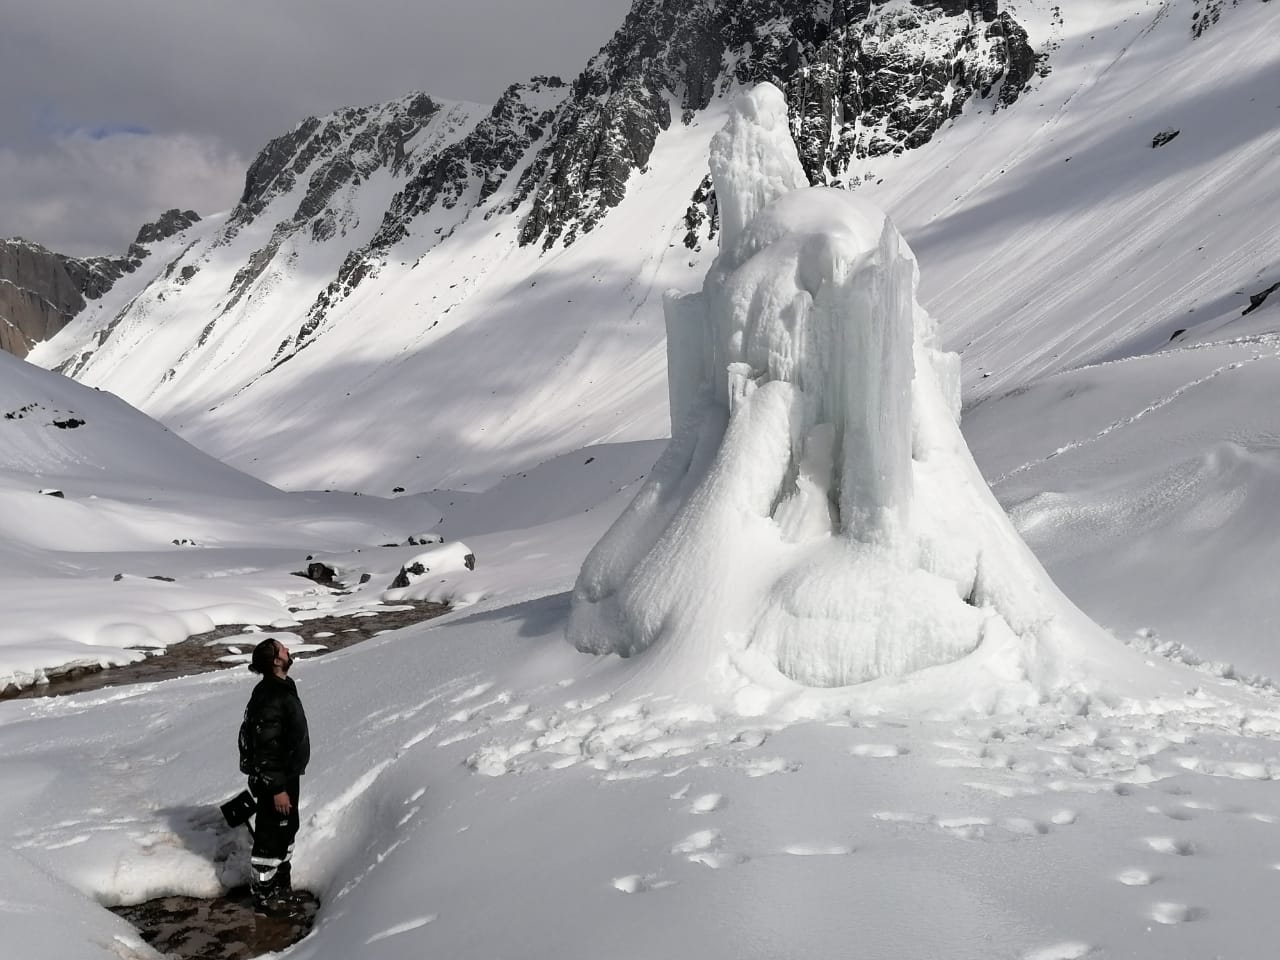 A person in a black winter outfit stands in a snowy mountain scene looking up at a glacial formation